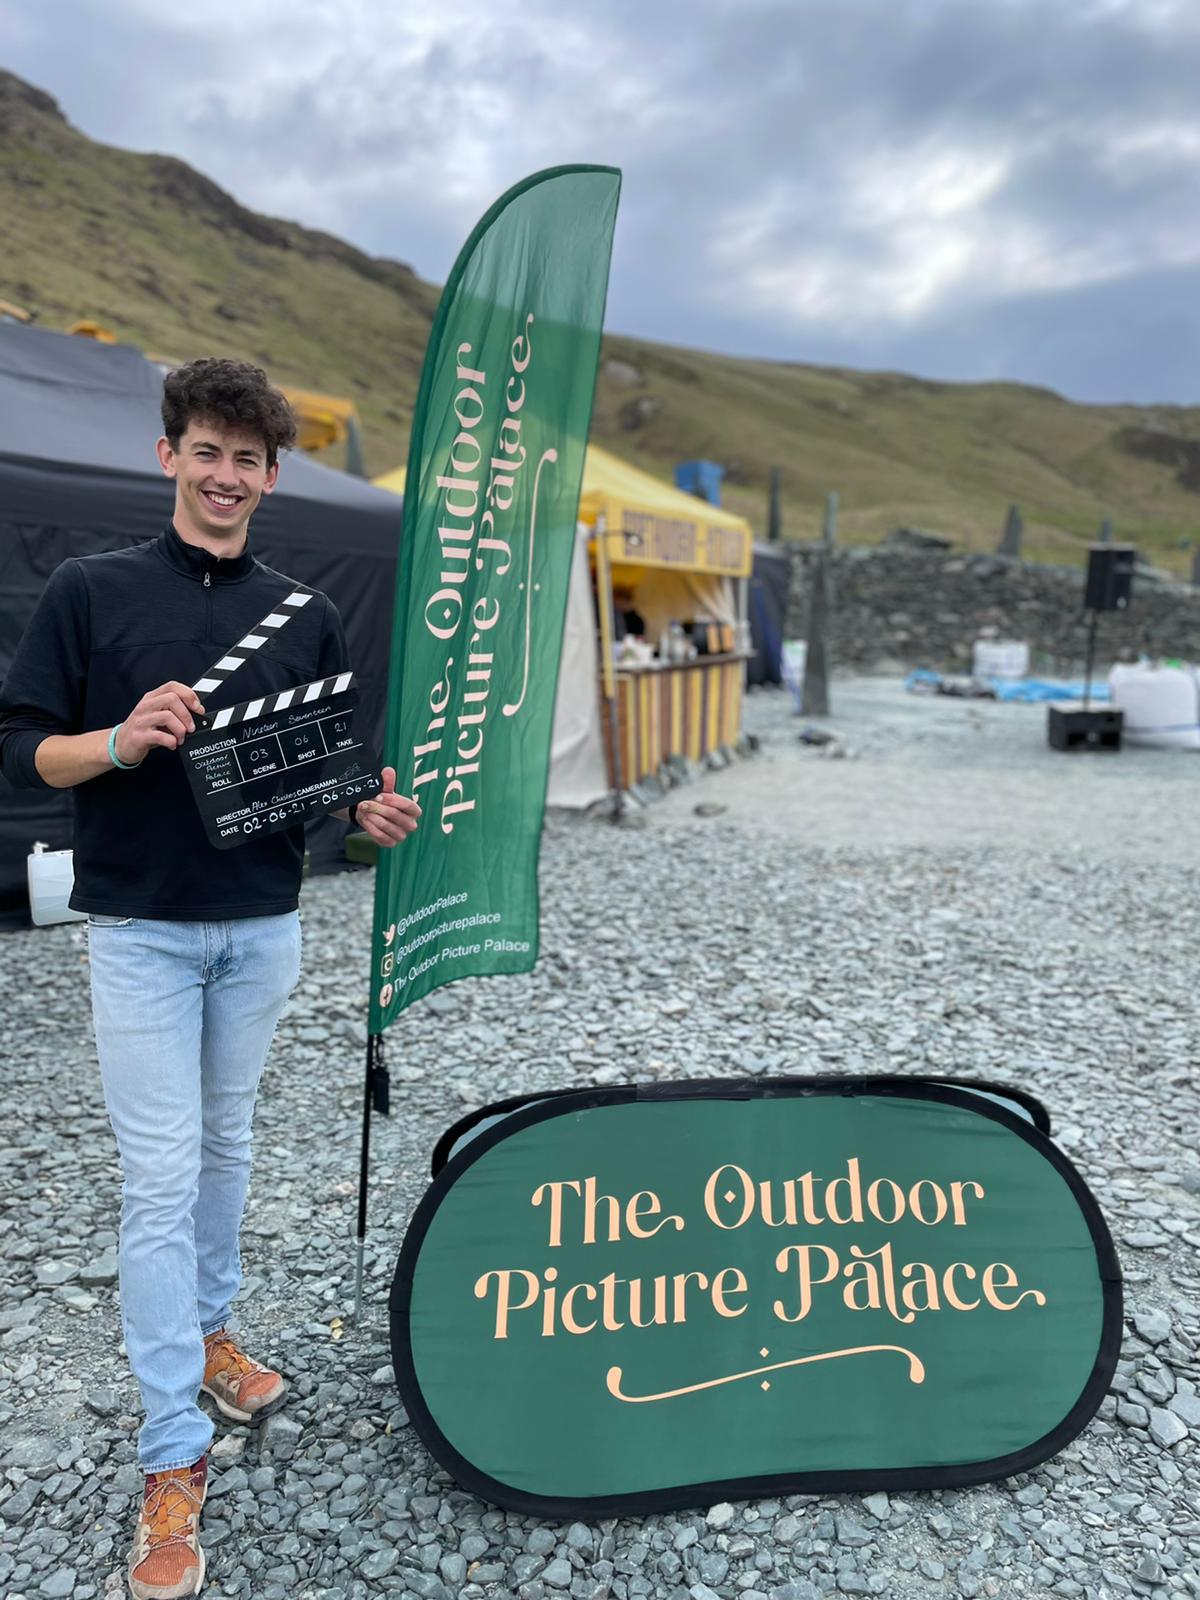 BUSINESS: Entrepreneur Alex Chesters founded The Outdoor Picture Palace